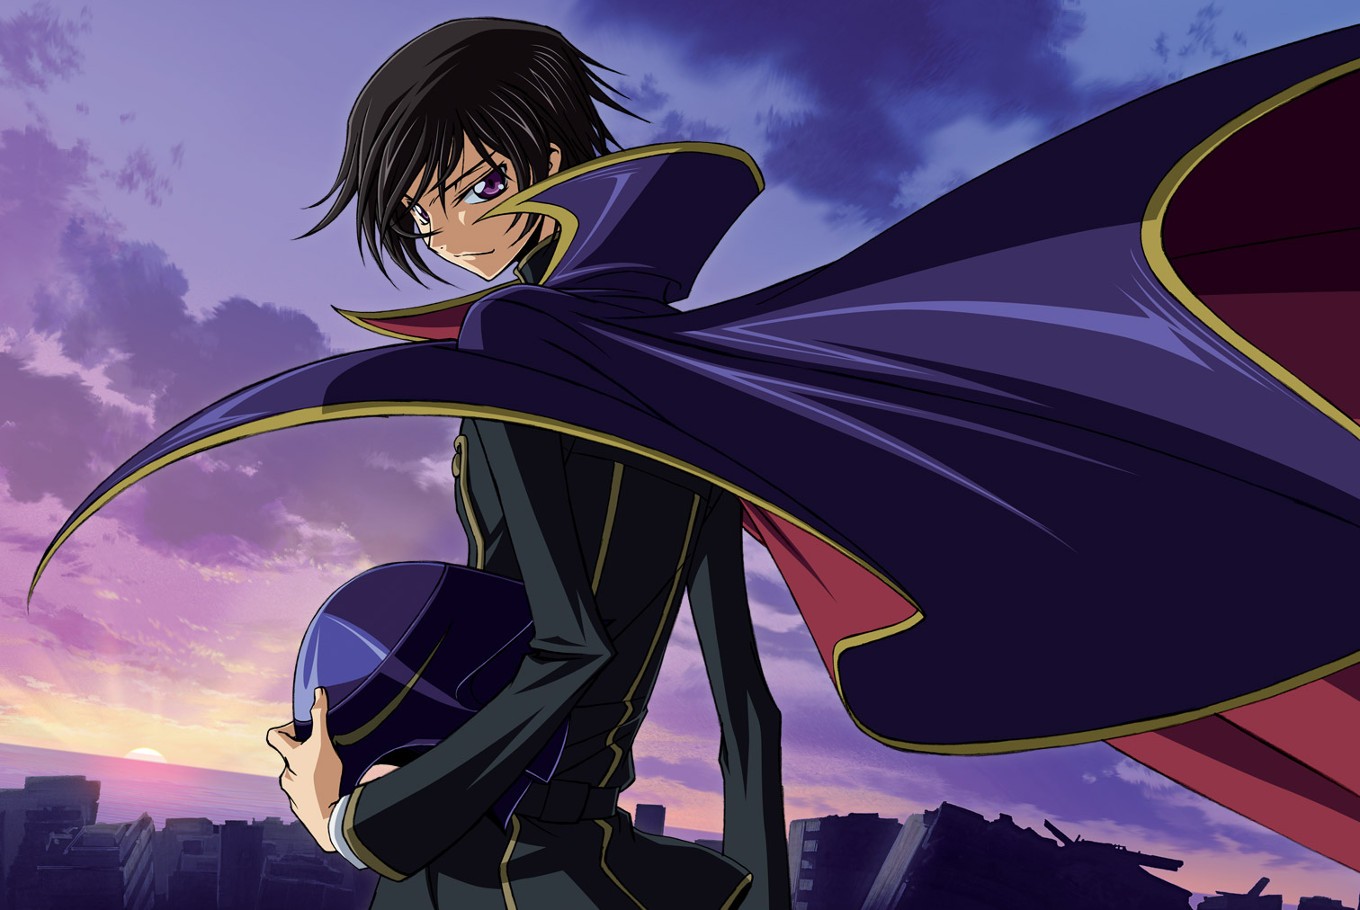 Is Code Geass Worth Your Time?